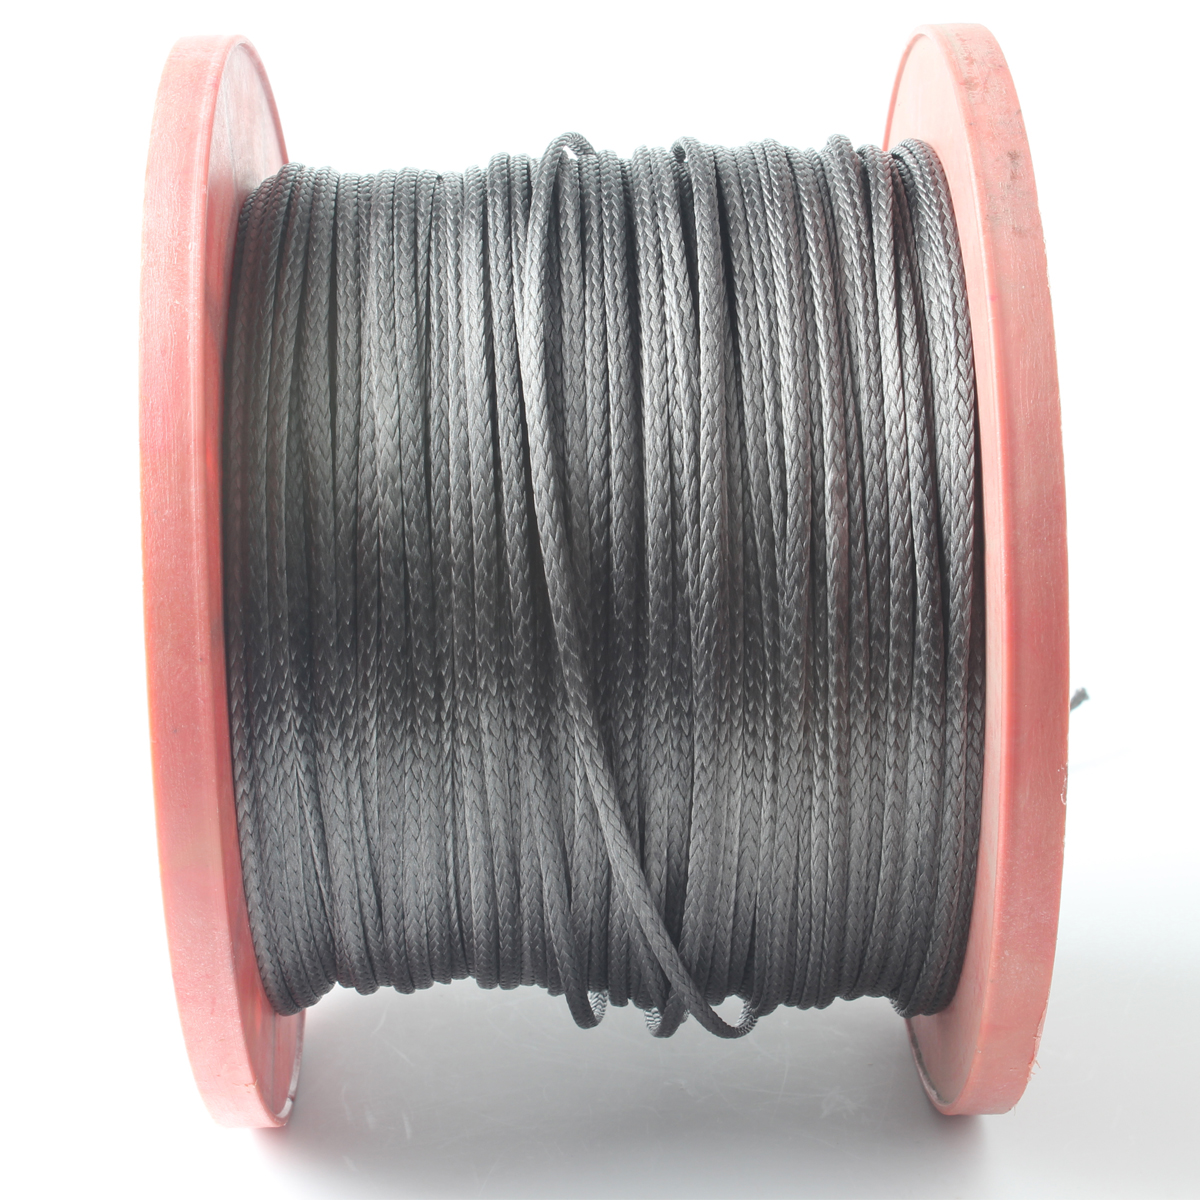 4mm 5/32" UHMWPE Braided Rudder Line For Sailboat